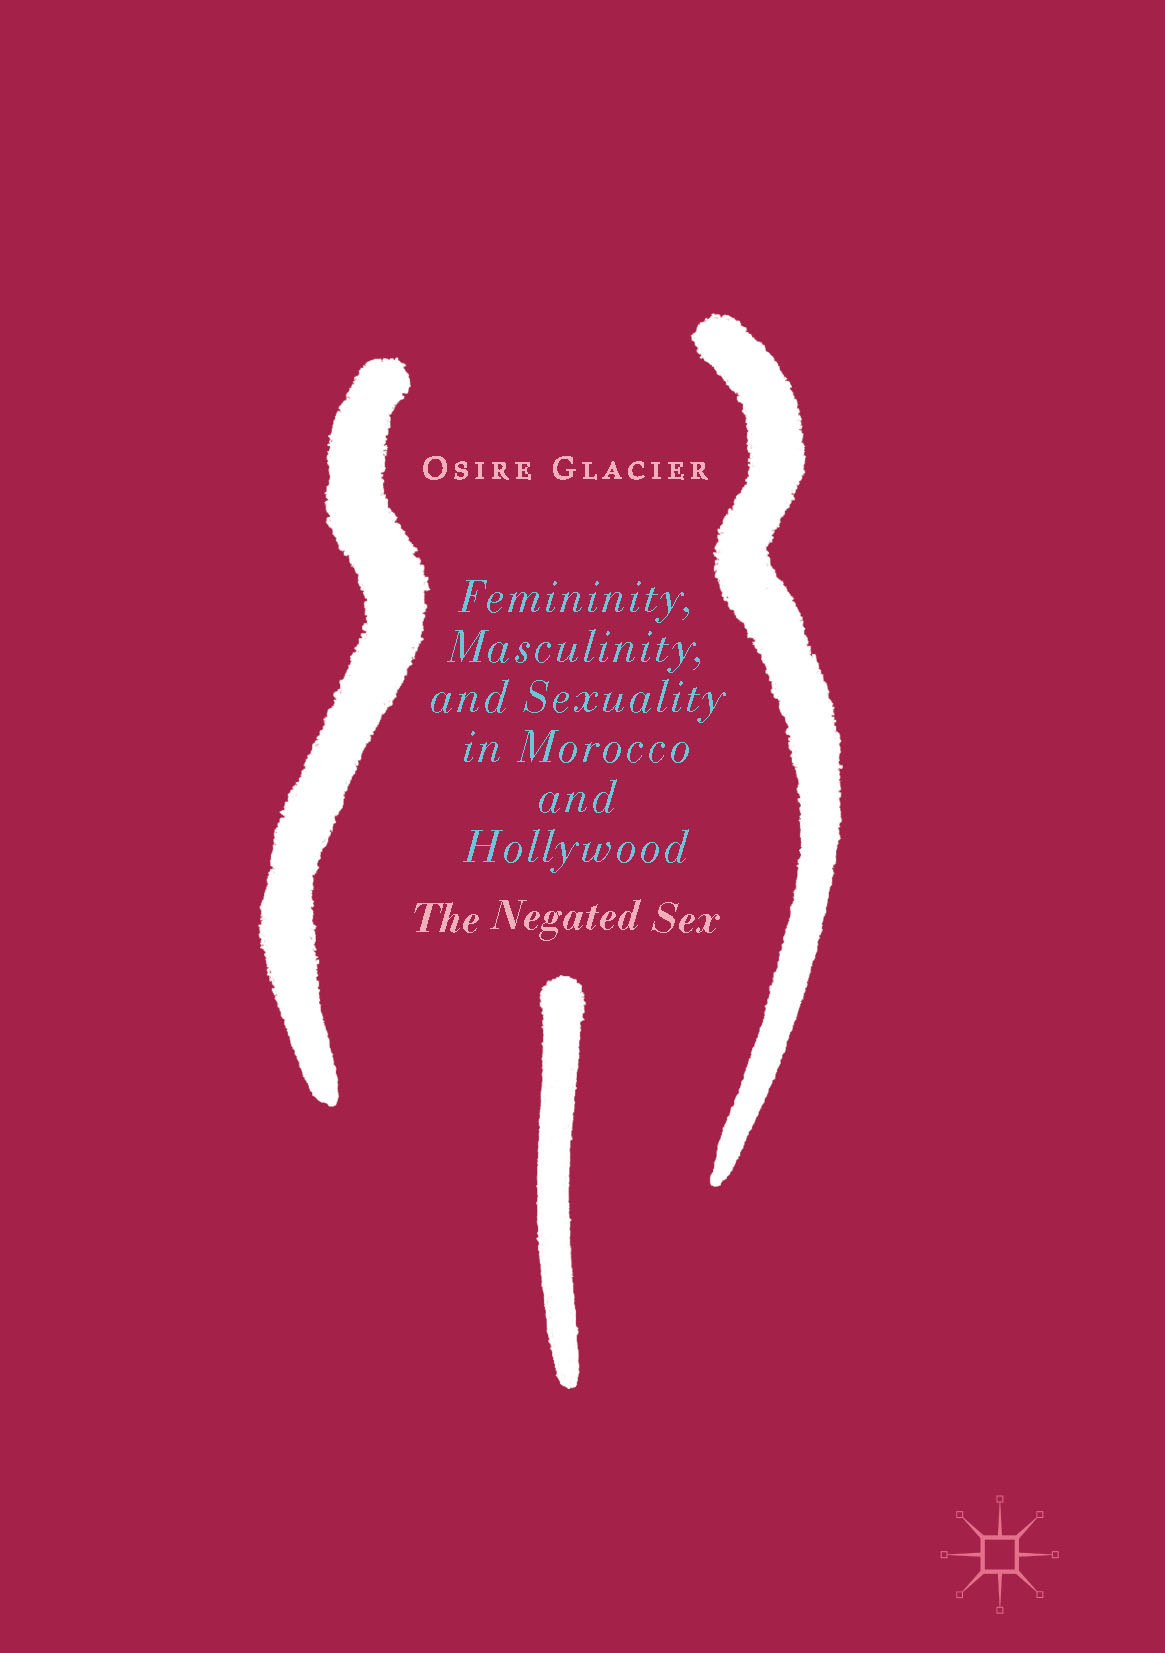 Glacier, Osire - Femininity, Masculinity, and Sexuality in Morocco and Hollywood, e-bok